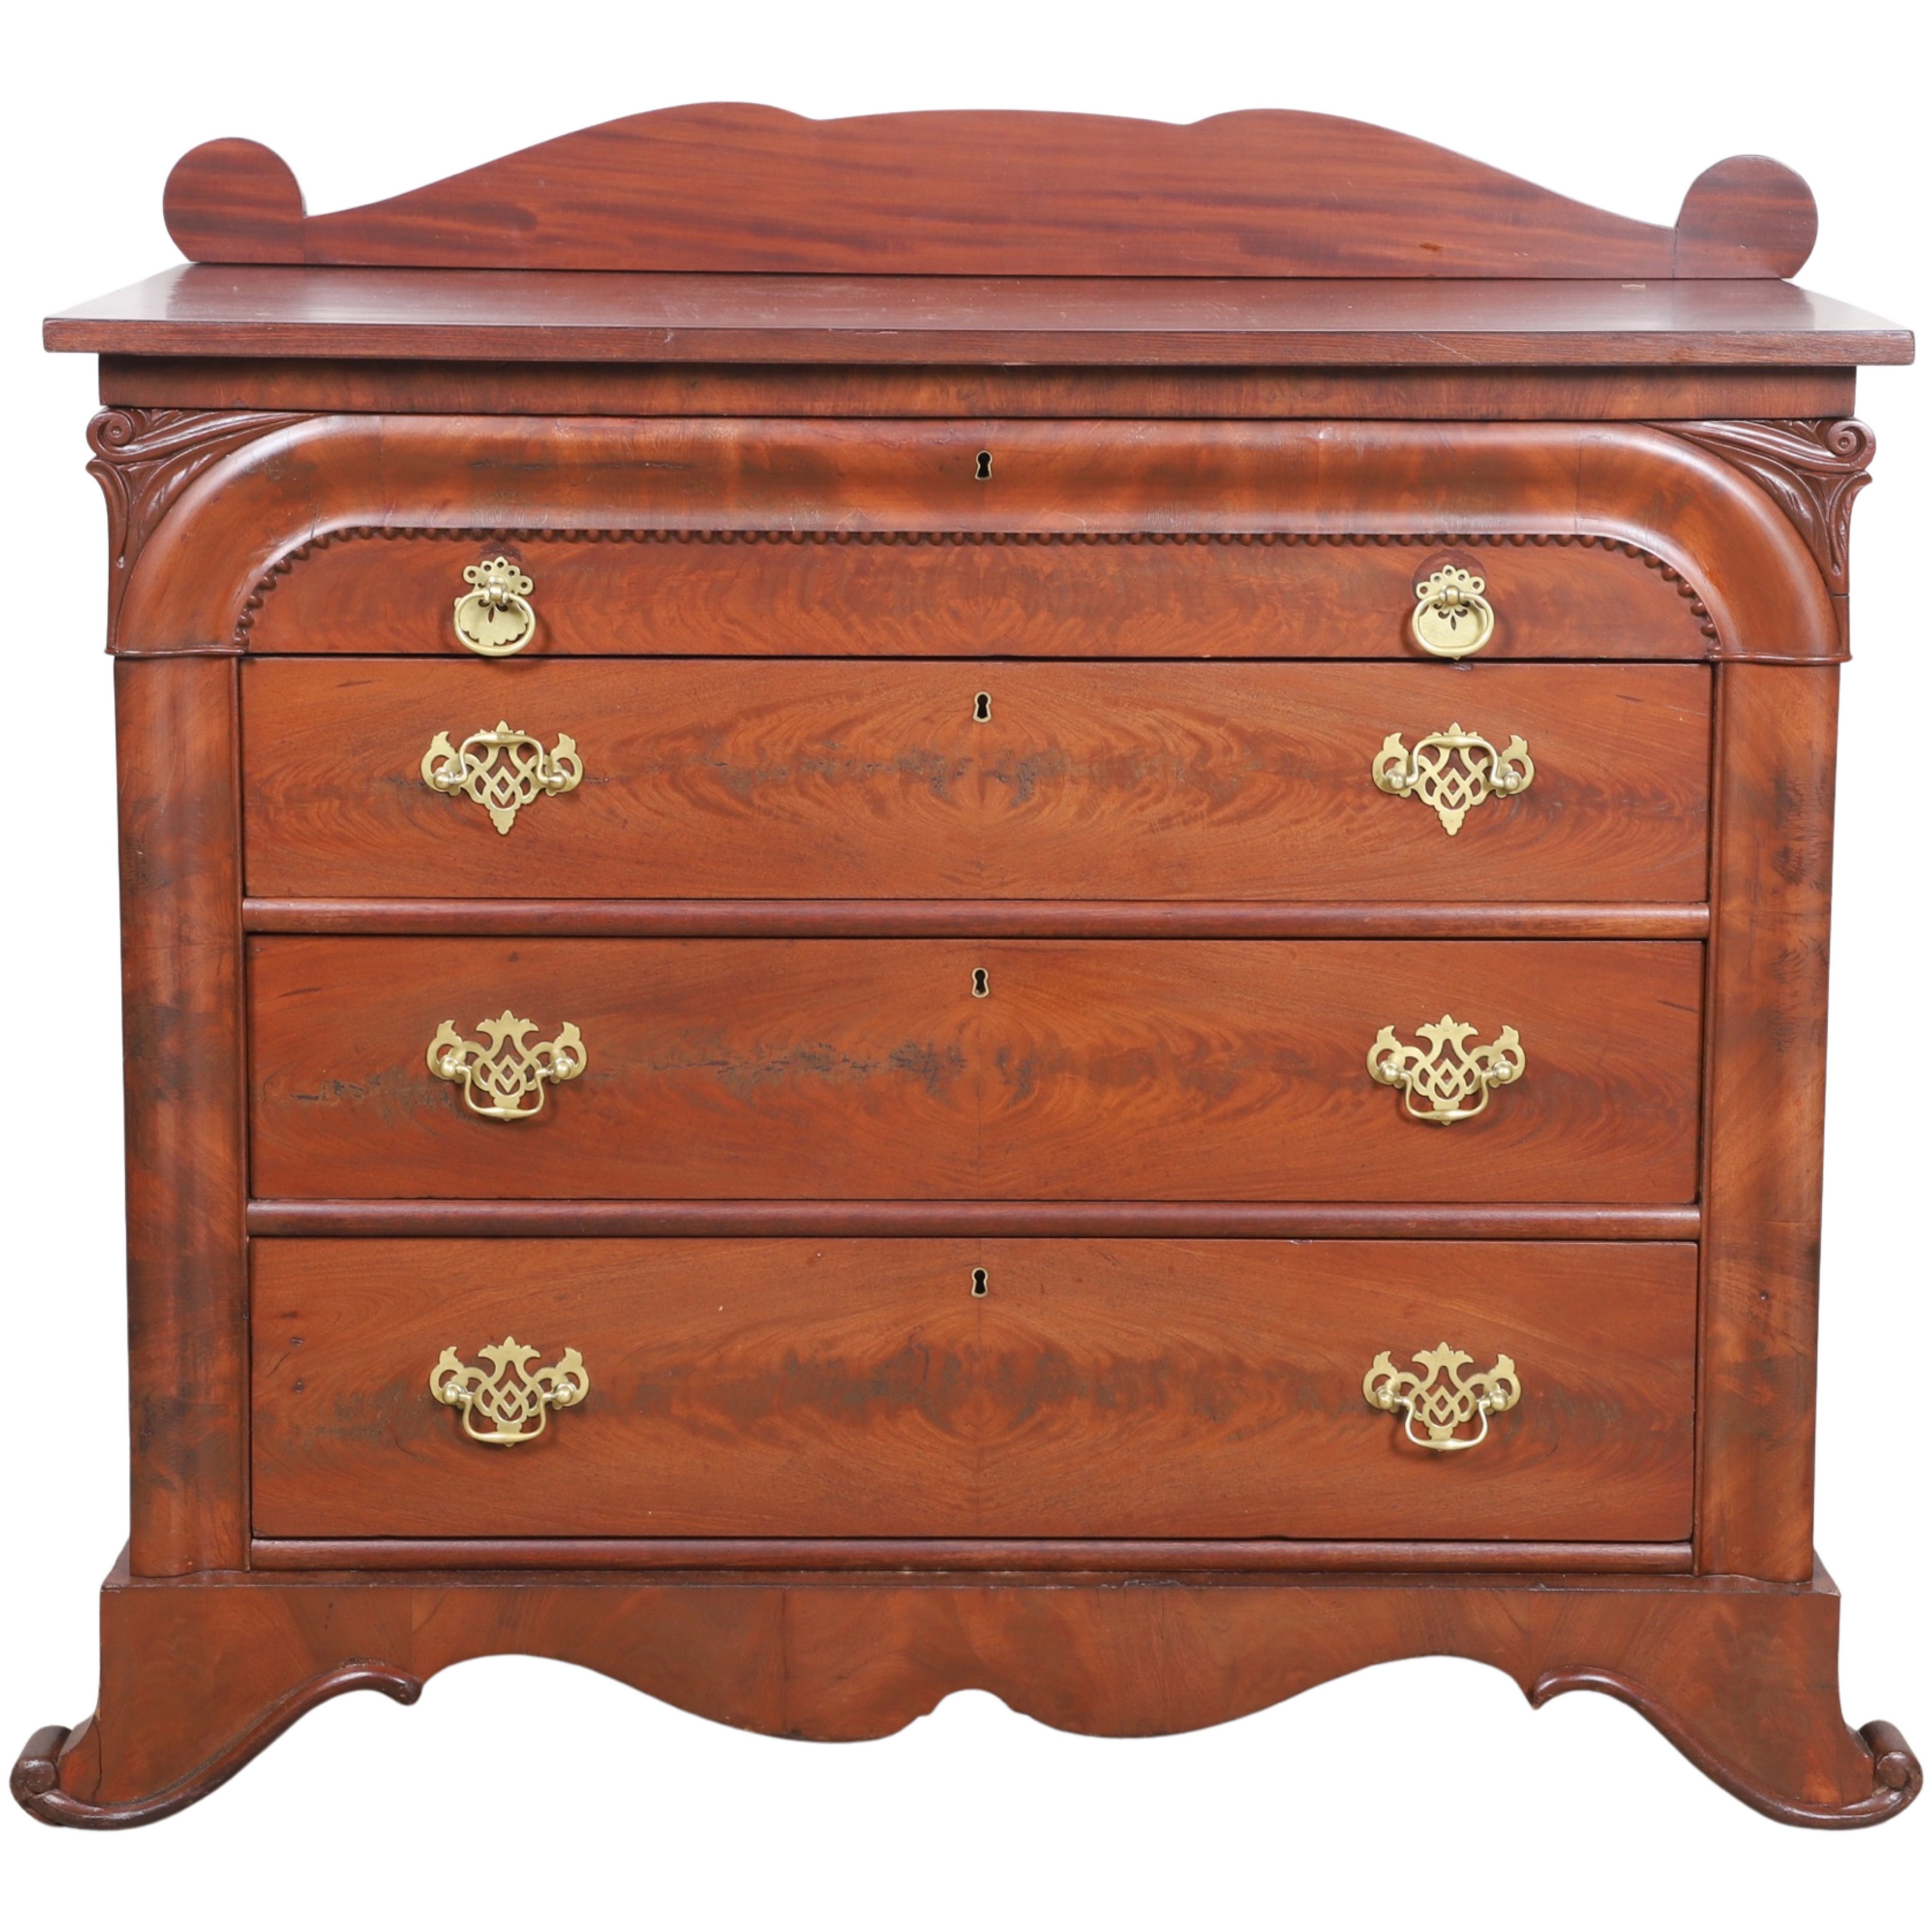 Mahogany chest of drawers, 4 graduated